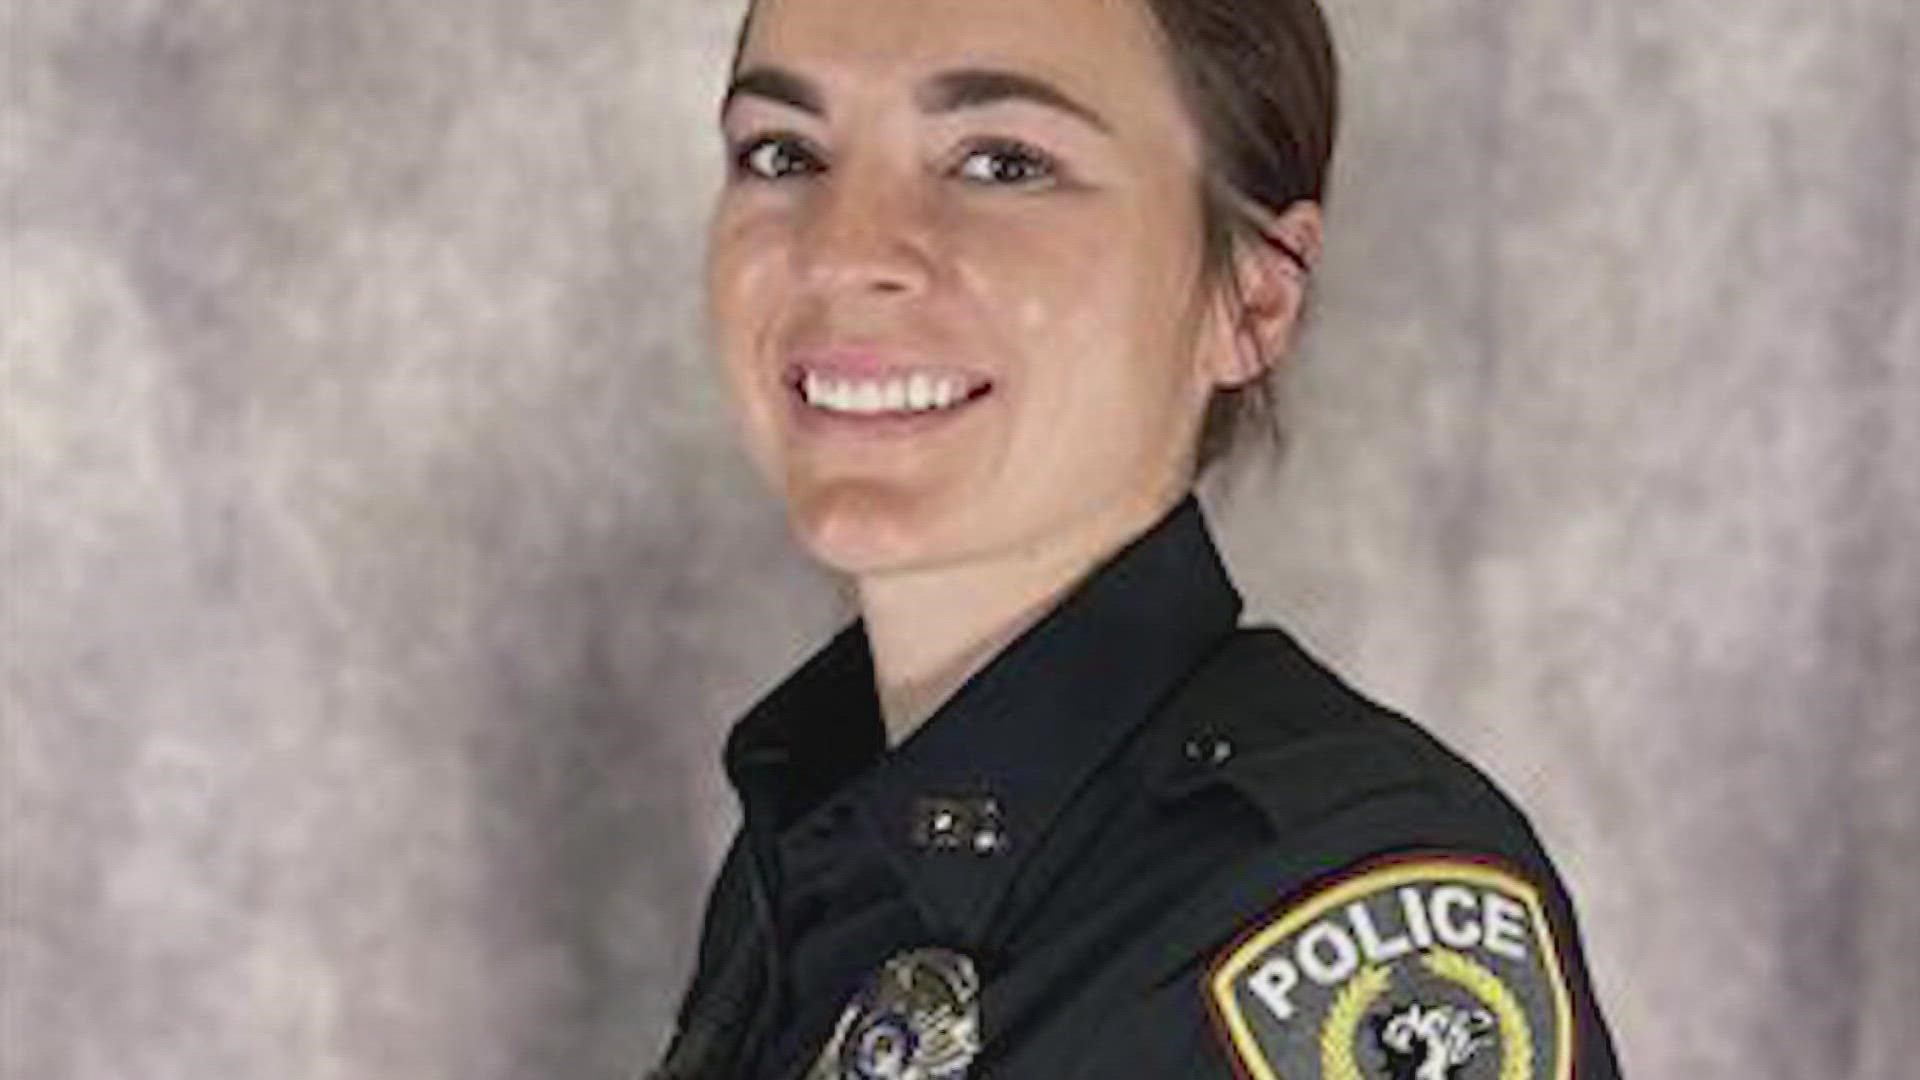 A former Texas DPS trooper reportedly under investigation for her actions while responding to the Uvalde shooting is now working as a police officer for Uvalde CISD.